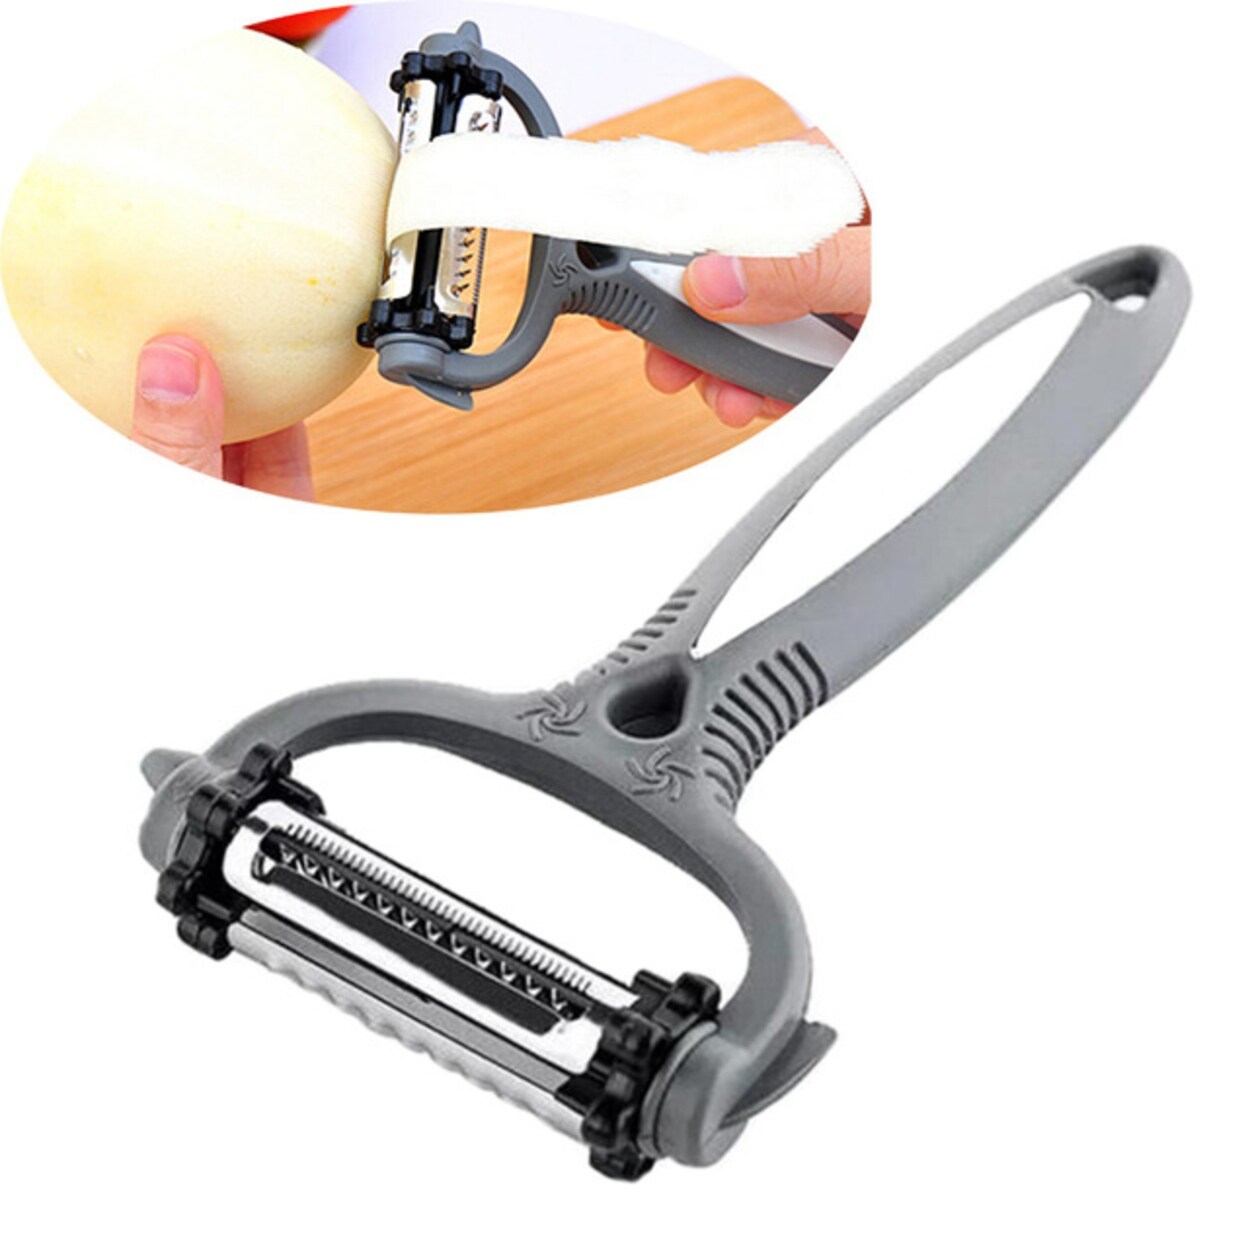 https://ak1.ostkcdn.com/images/products/is/images/direct/615060ef05139852f25f41e1e8fe7ee5885bd1e0/Multifunctional-360-Degree-Rotary-Carrot-Potato-Peeler.jpg